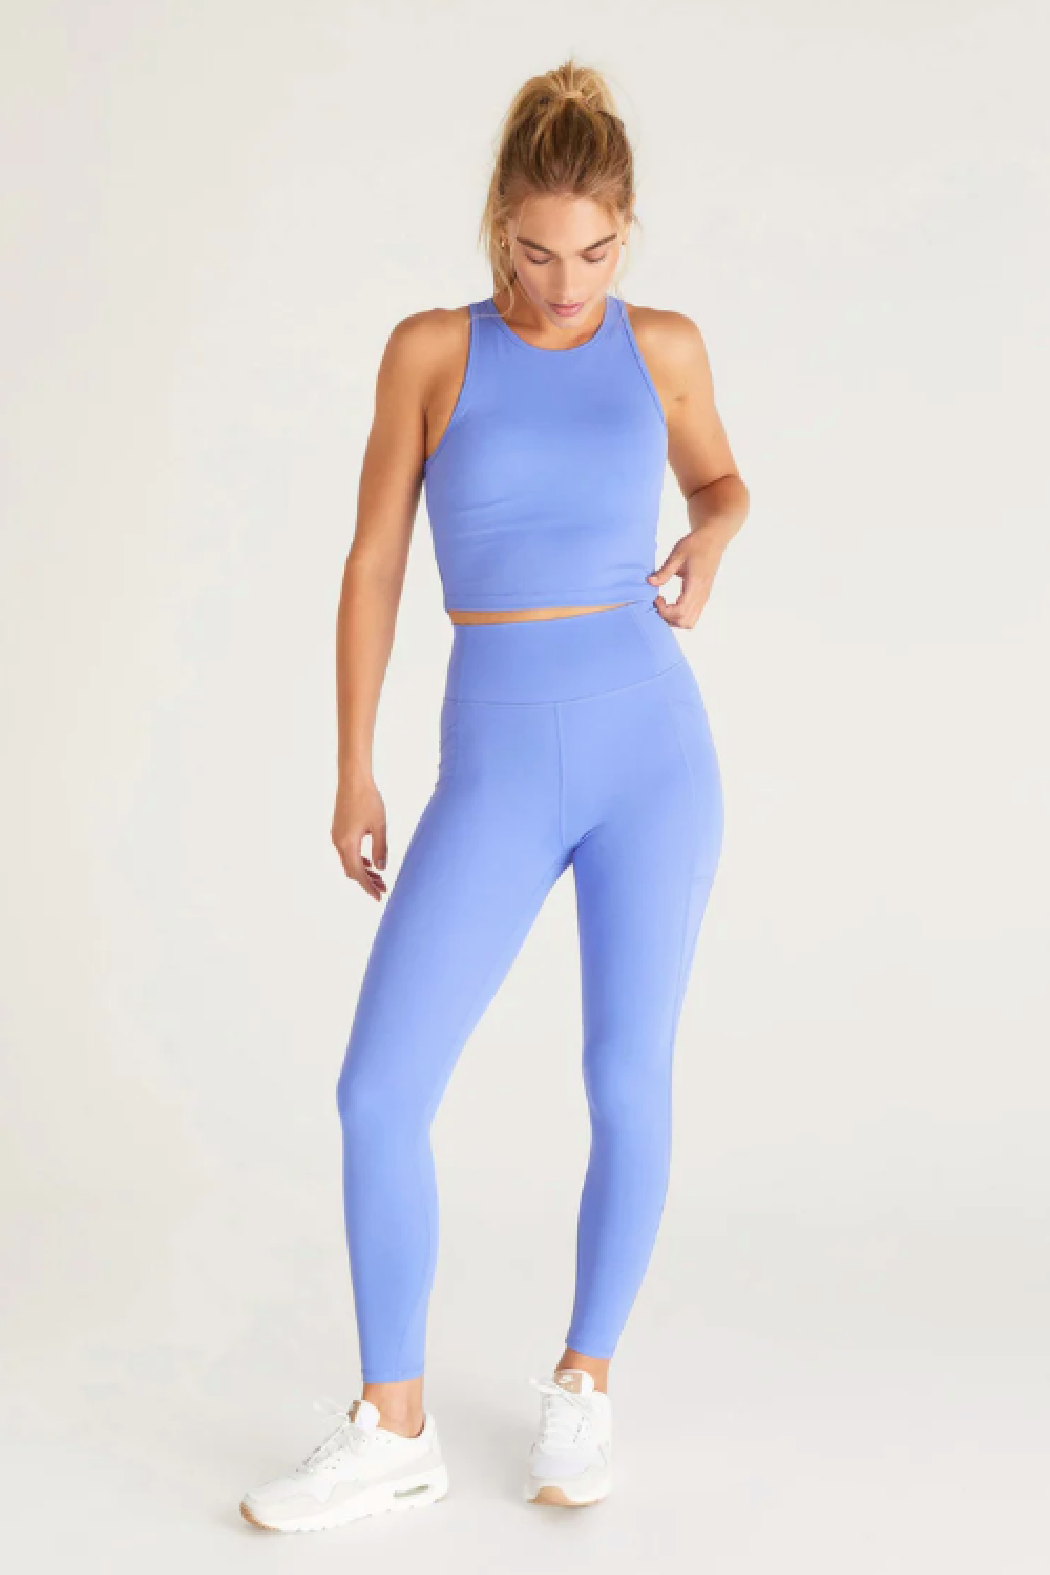 Get Going 7/8 Legging – The Old Mill